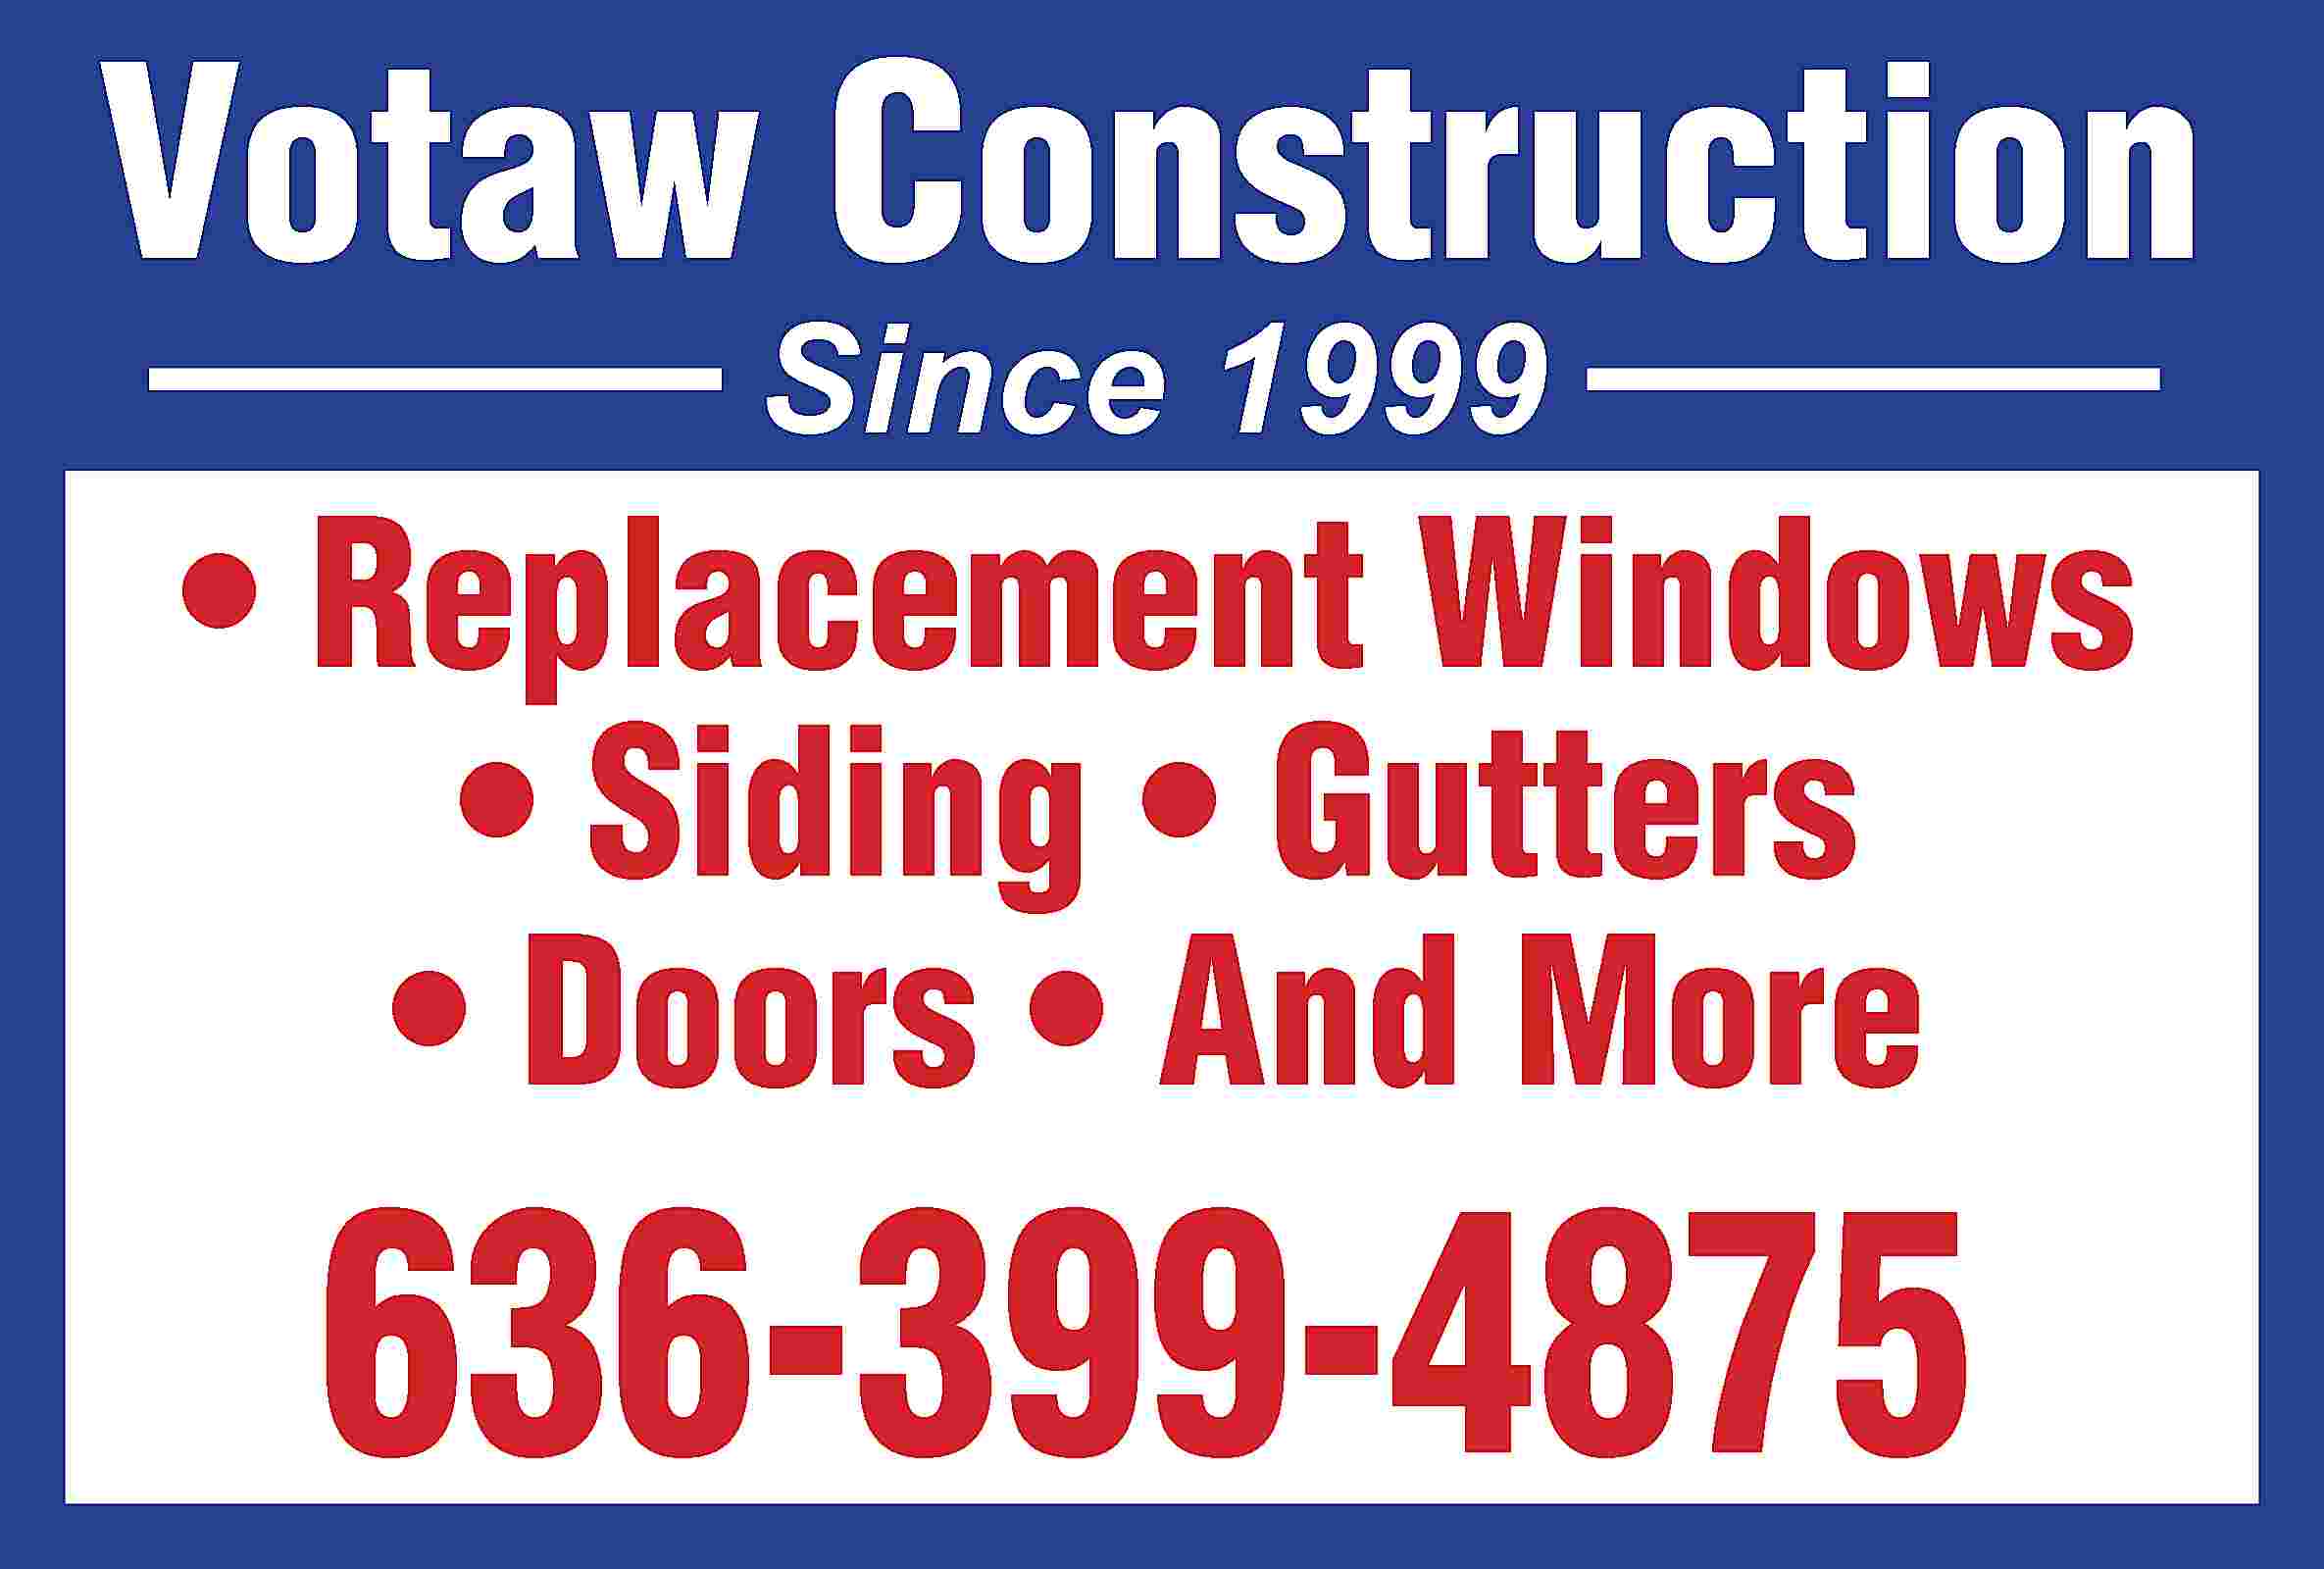 Votaw Construction Since 1999 •  Votaw Construction Since 1999 • Replacement Windows • Siding • Gutters • Doors • And More 636-399-4875